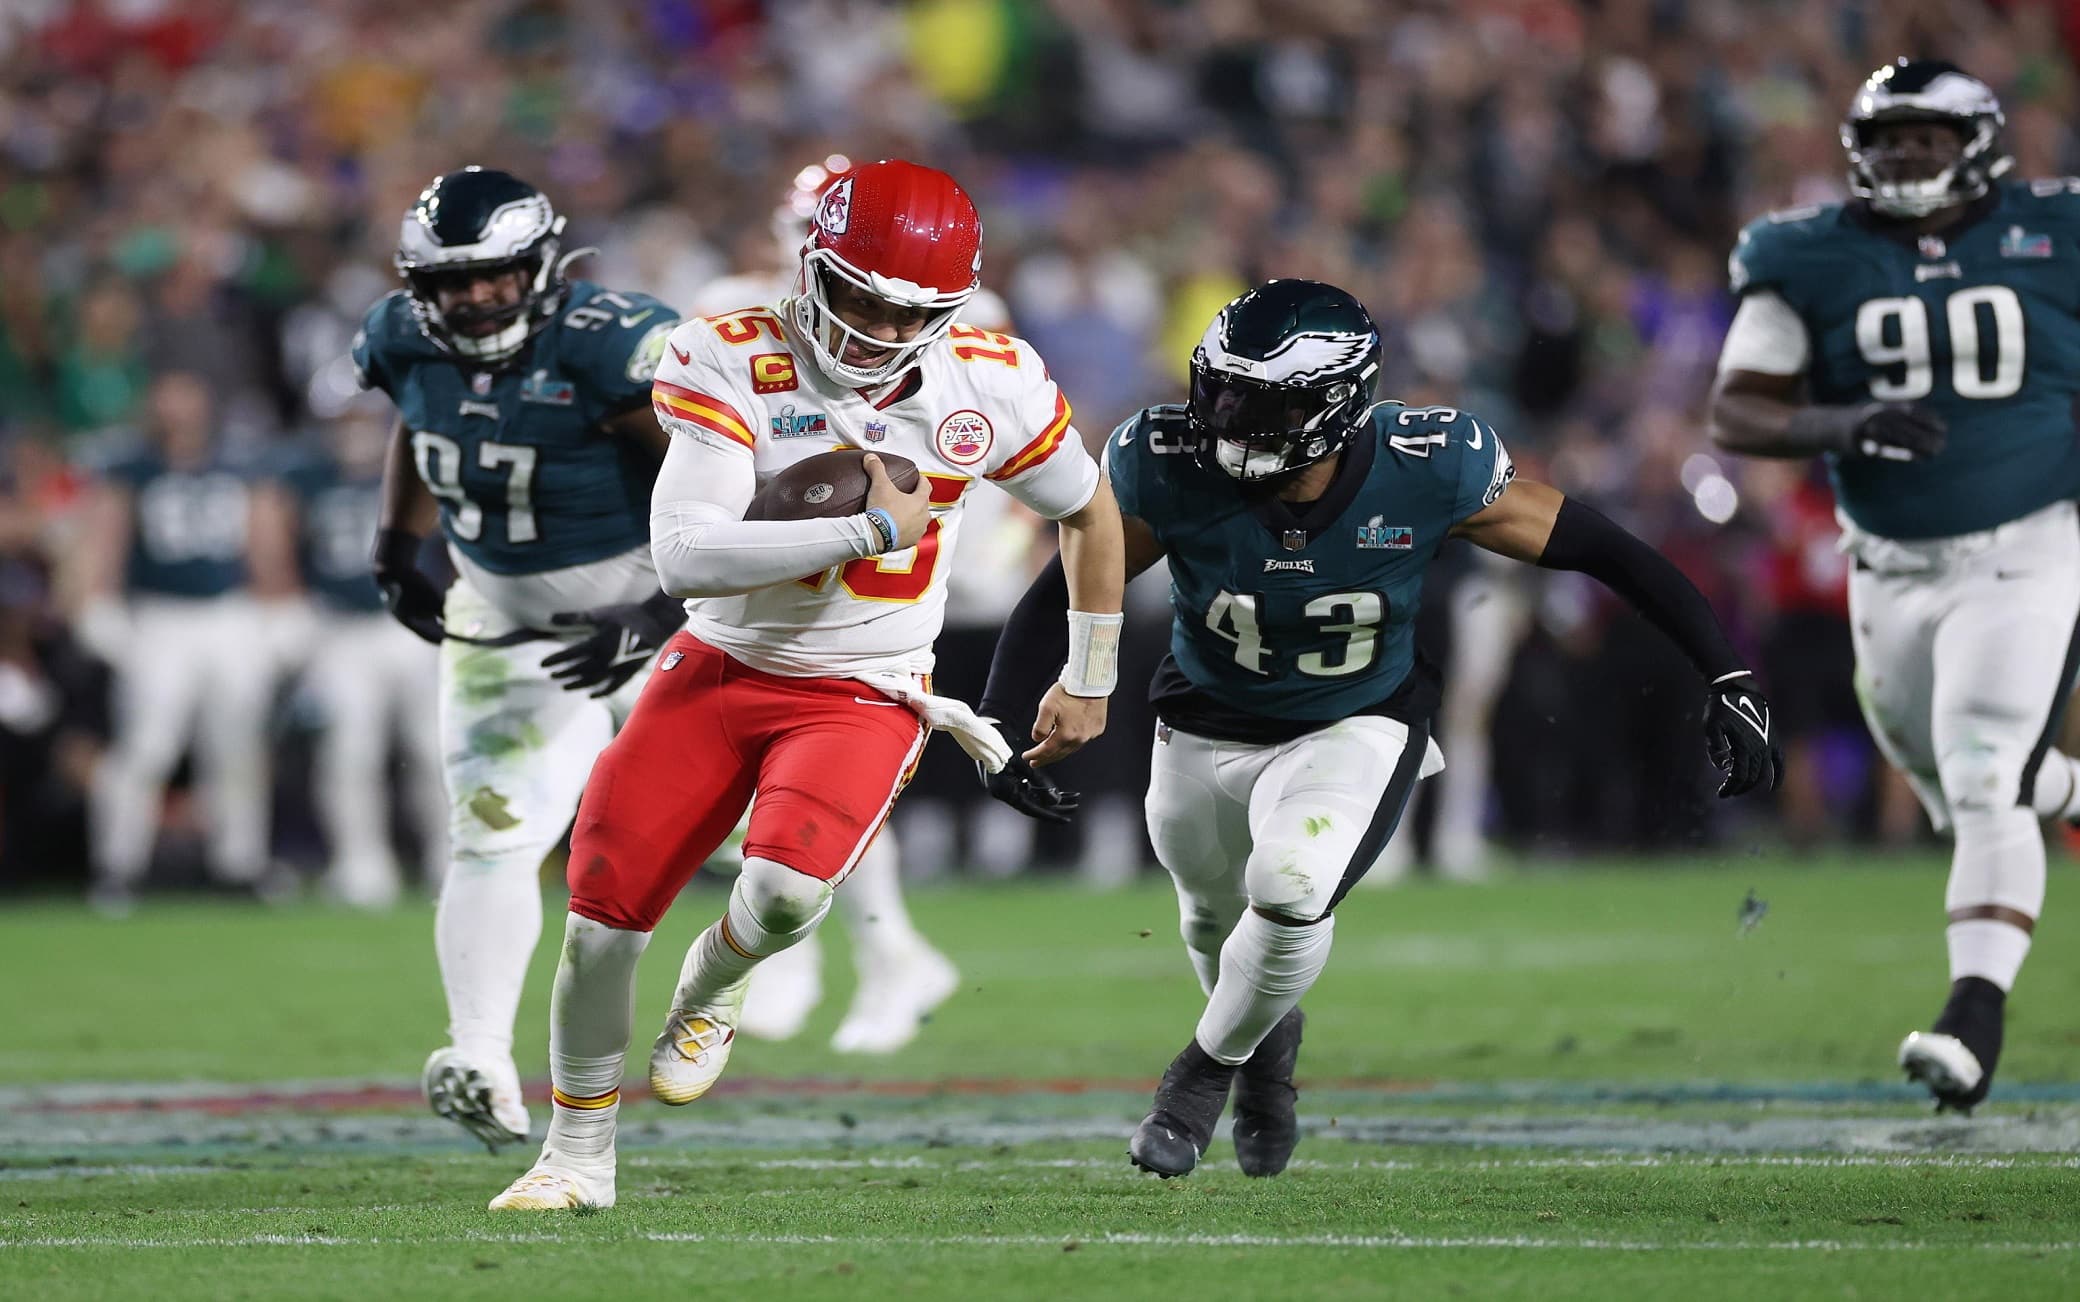 epa10464418 Kansas City Chiefs quarterback Patrick Mahomes (L) scrambles for a first down against the Philadelphia Eagles in the fourth quarter of Super Bowl LVII between the AFC champion Kansas City Chiefs and the NFC champion Philadelphia Eagles at State Farm Stadium in Glendale, Arizona, 12 February 2023. The annual Super Bowl is the Championship game of the NFL between the AFC Champion and the NFC Champion and has been held every year since January of 1967.  EPA/CAROLINE BREHMAN